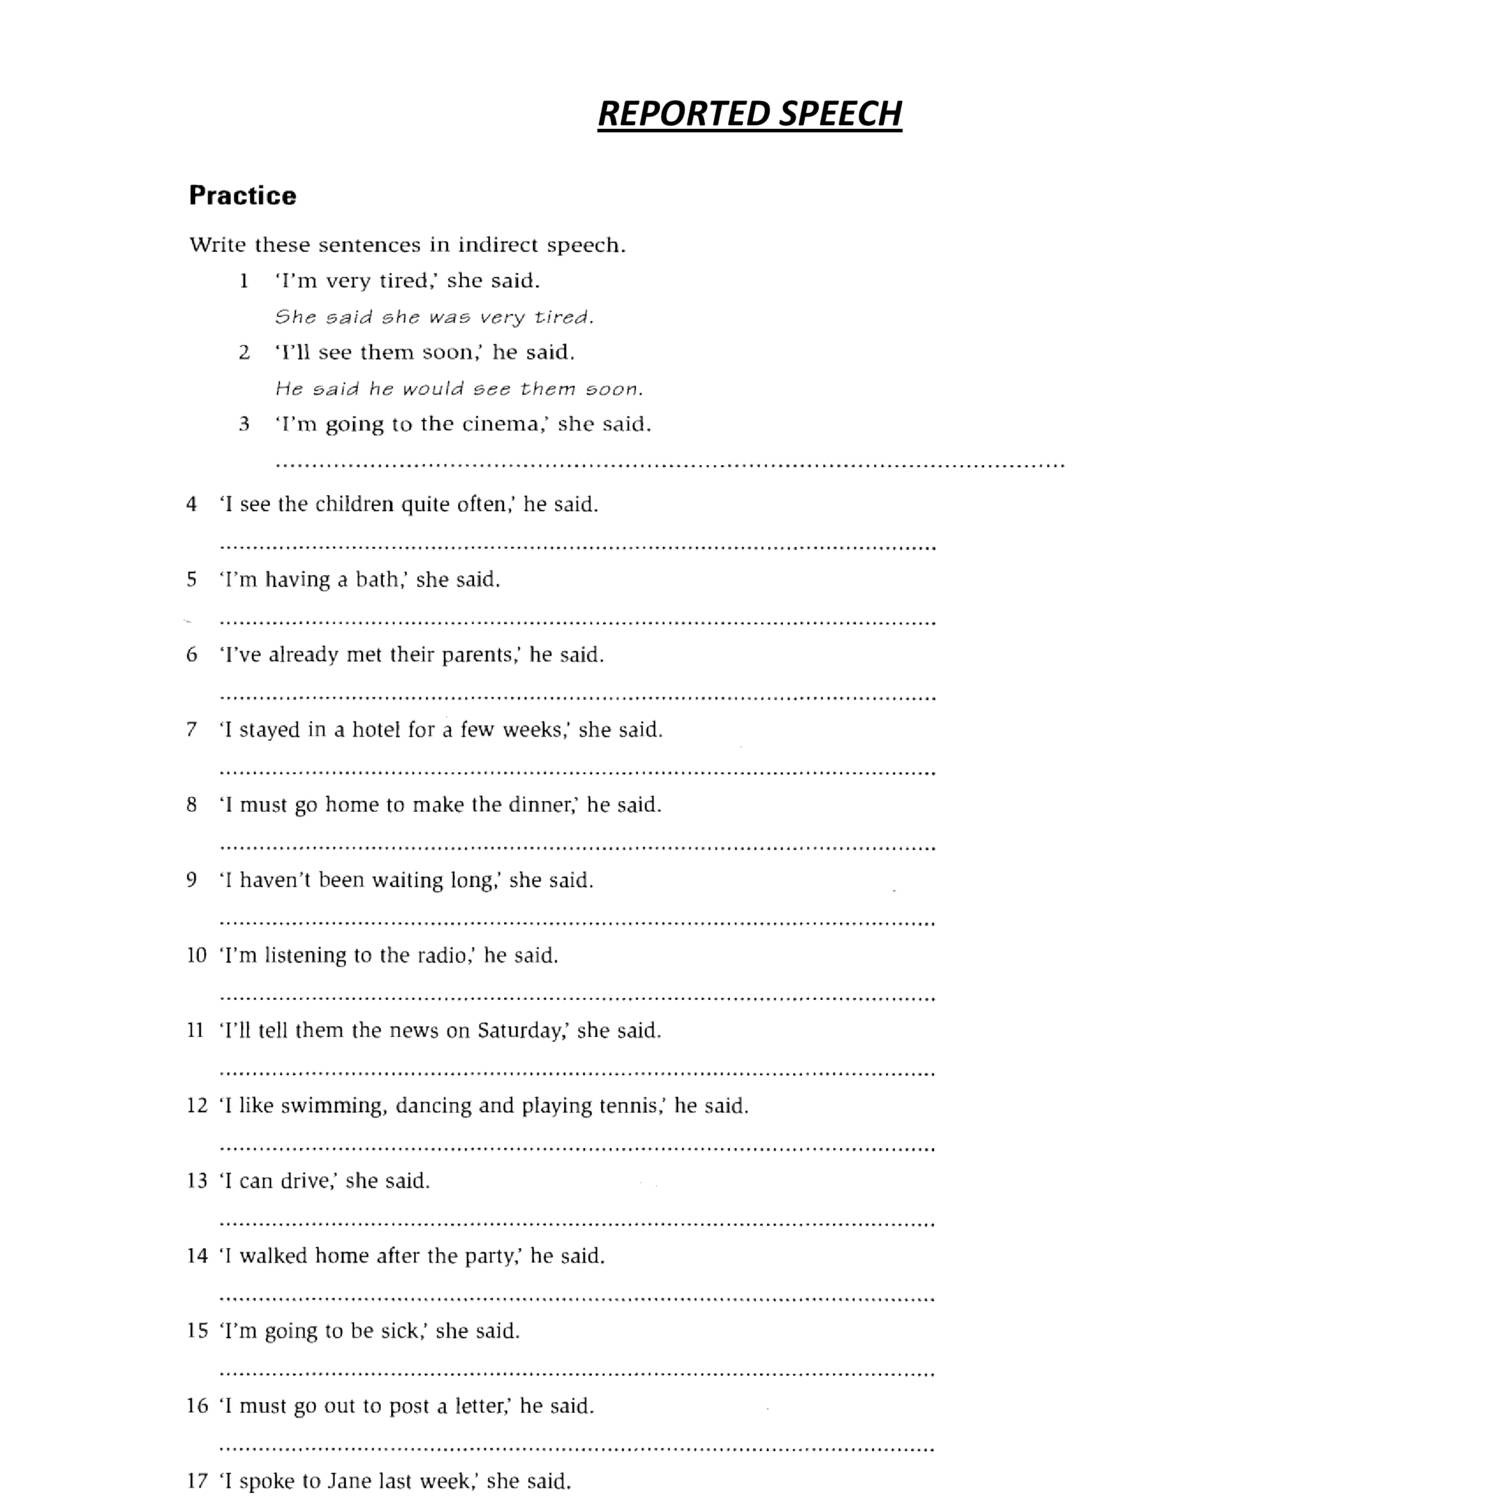 reported speech exercises multiple choice pdf